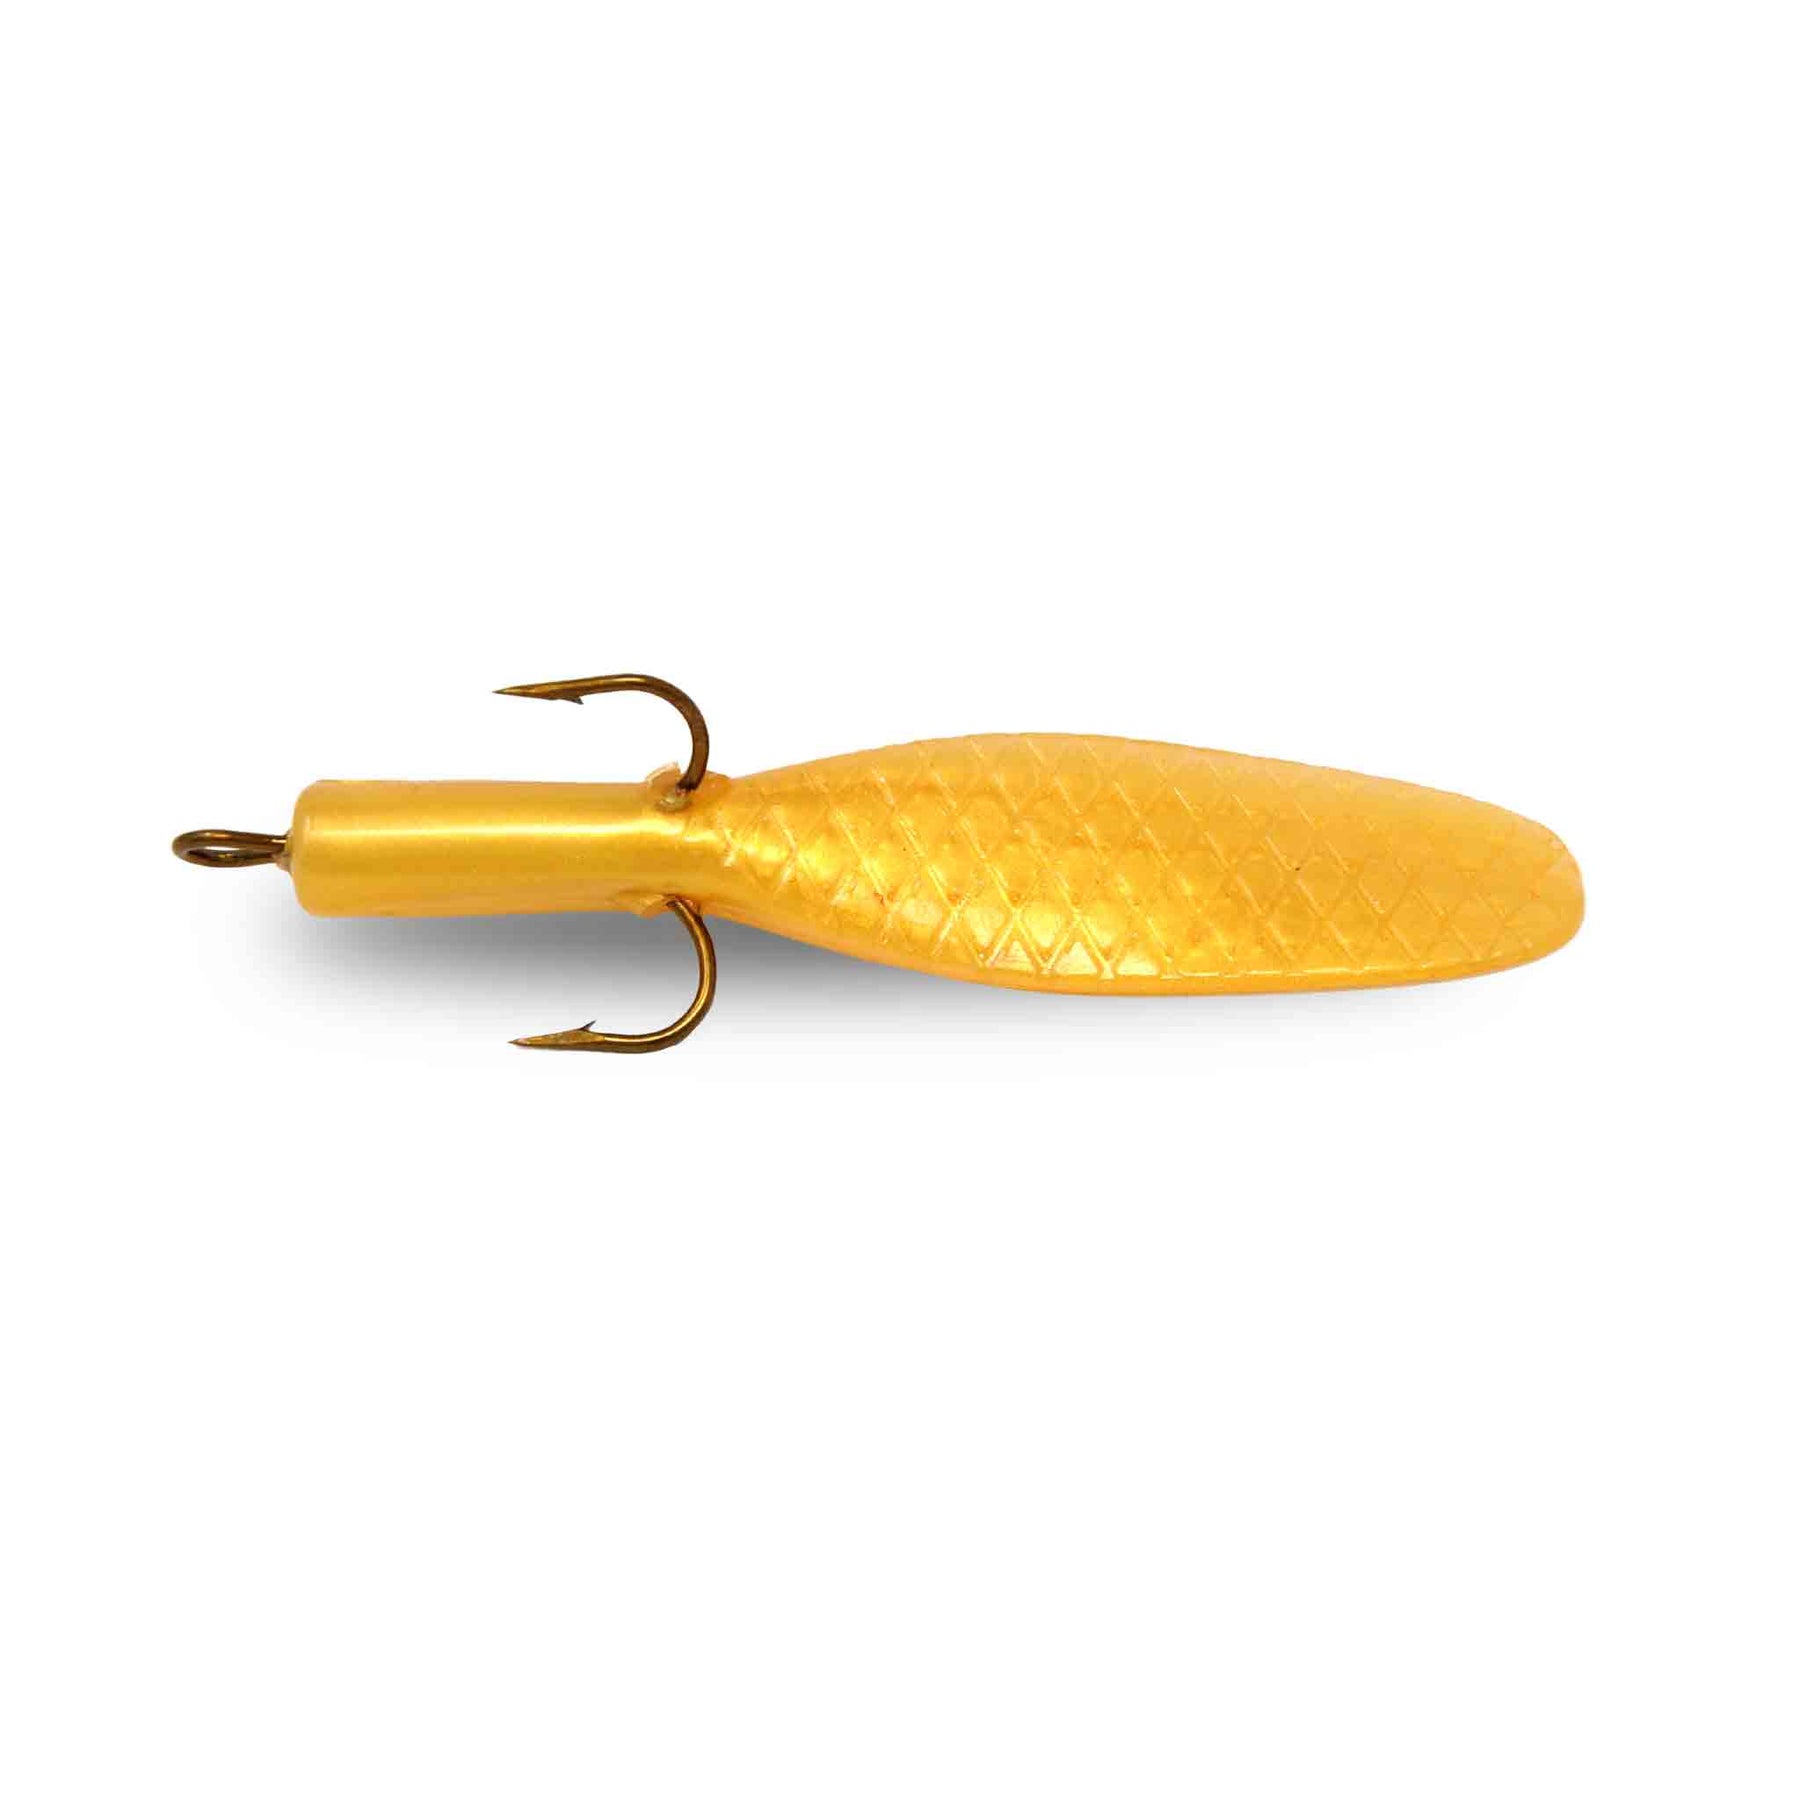 Beaver's Baits Baby Beaver Replacement Tail Gold Replacement Tails